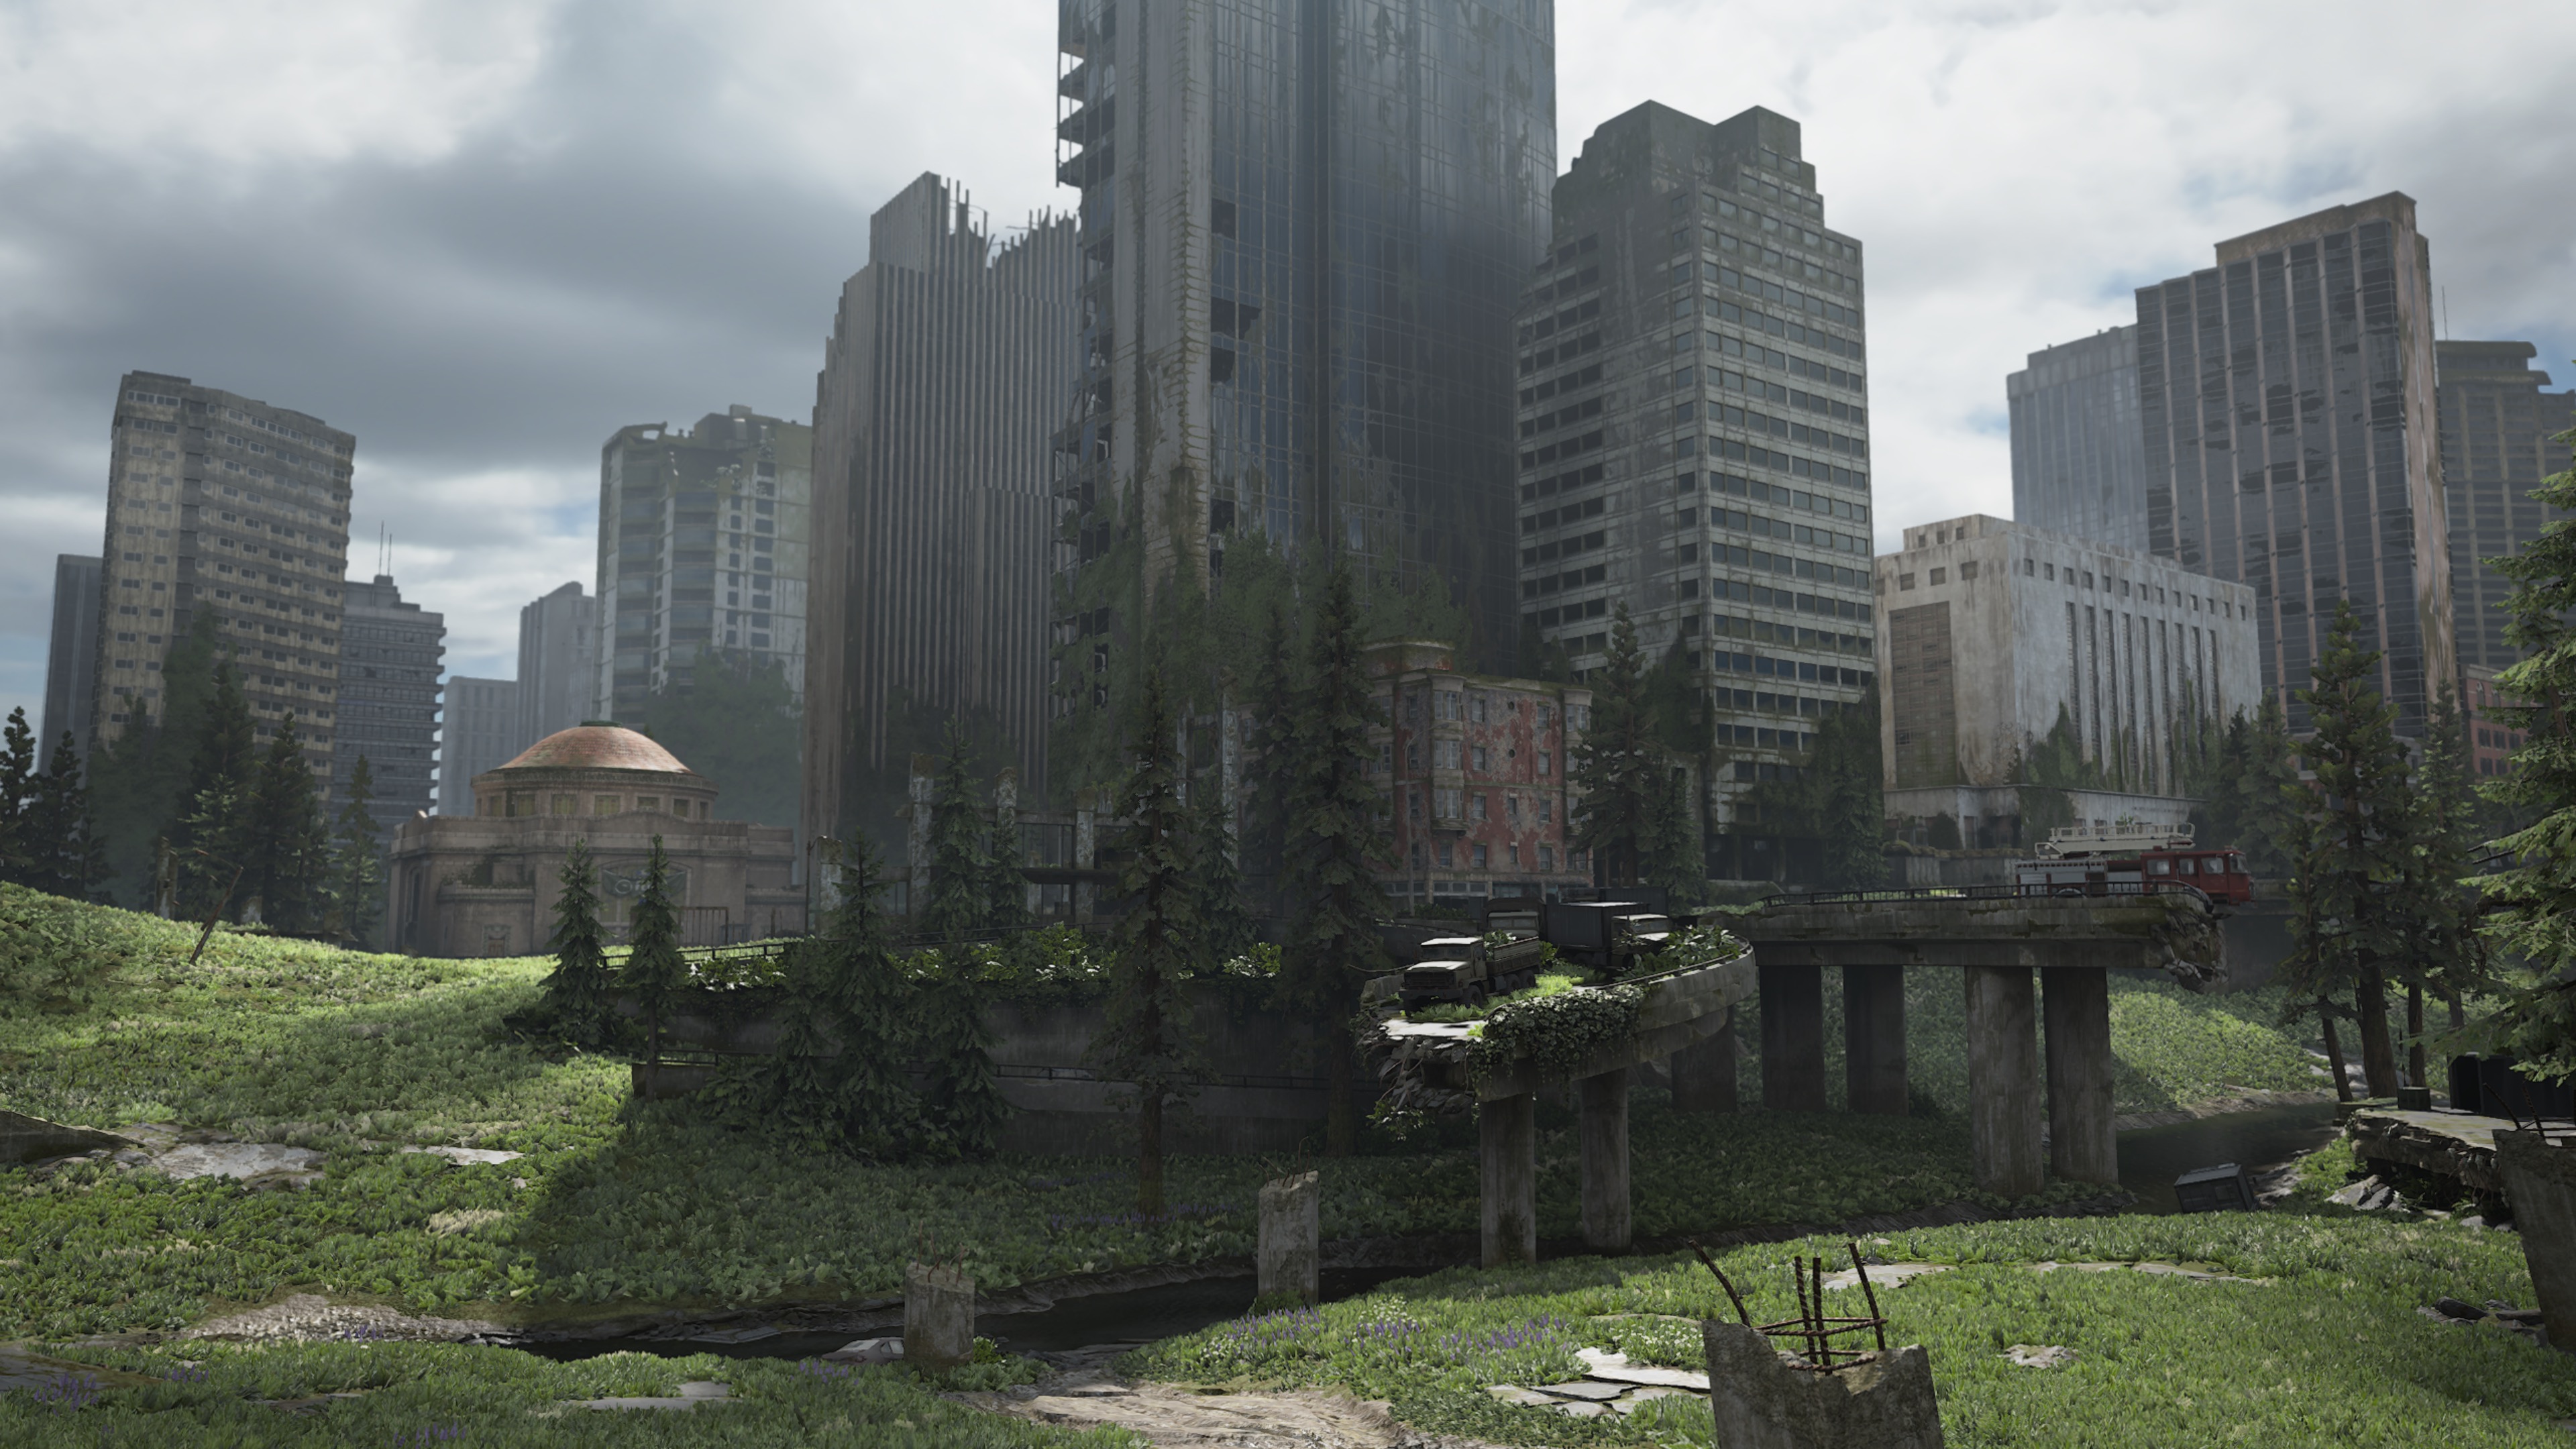 The Last of Us Part II Remastered, The Last of Us Wiki